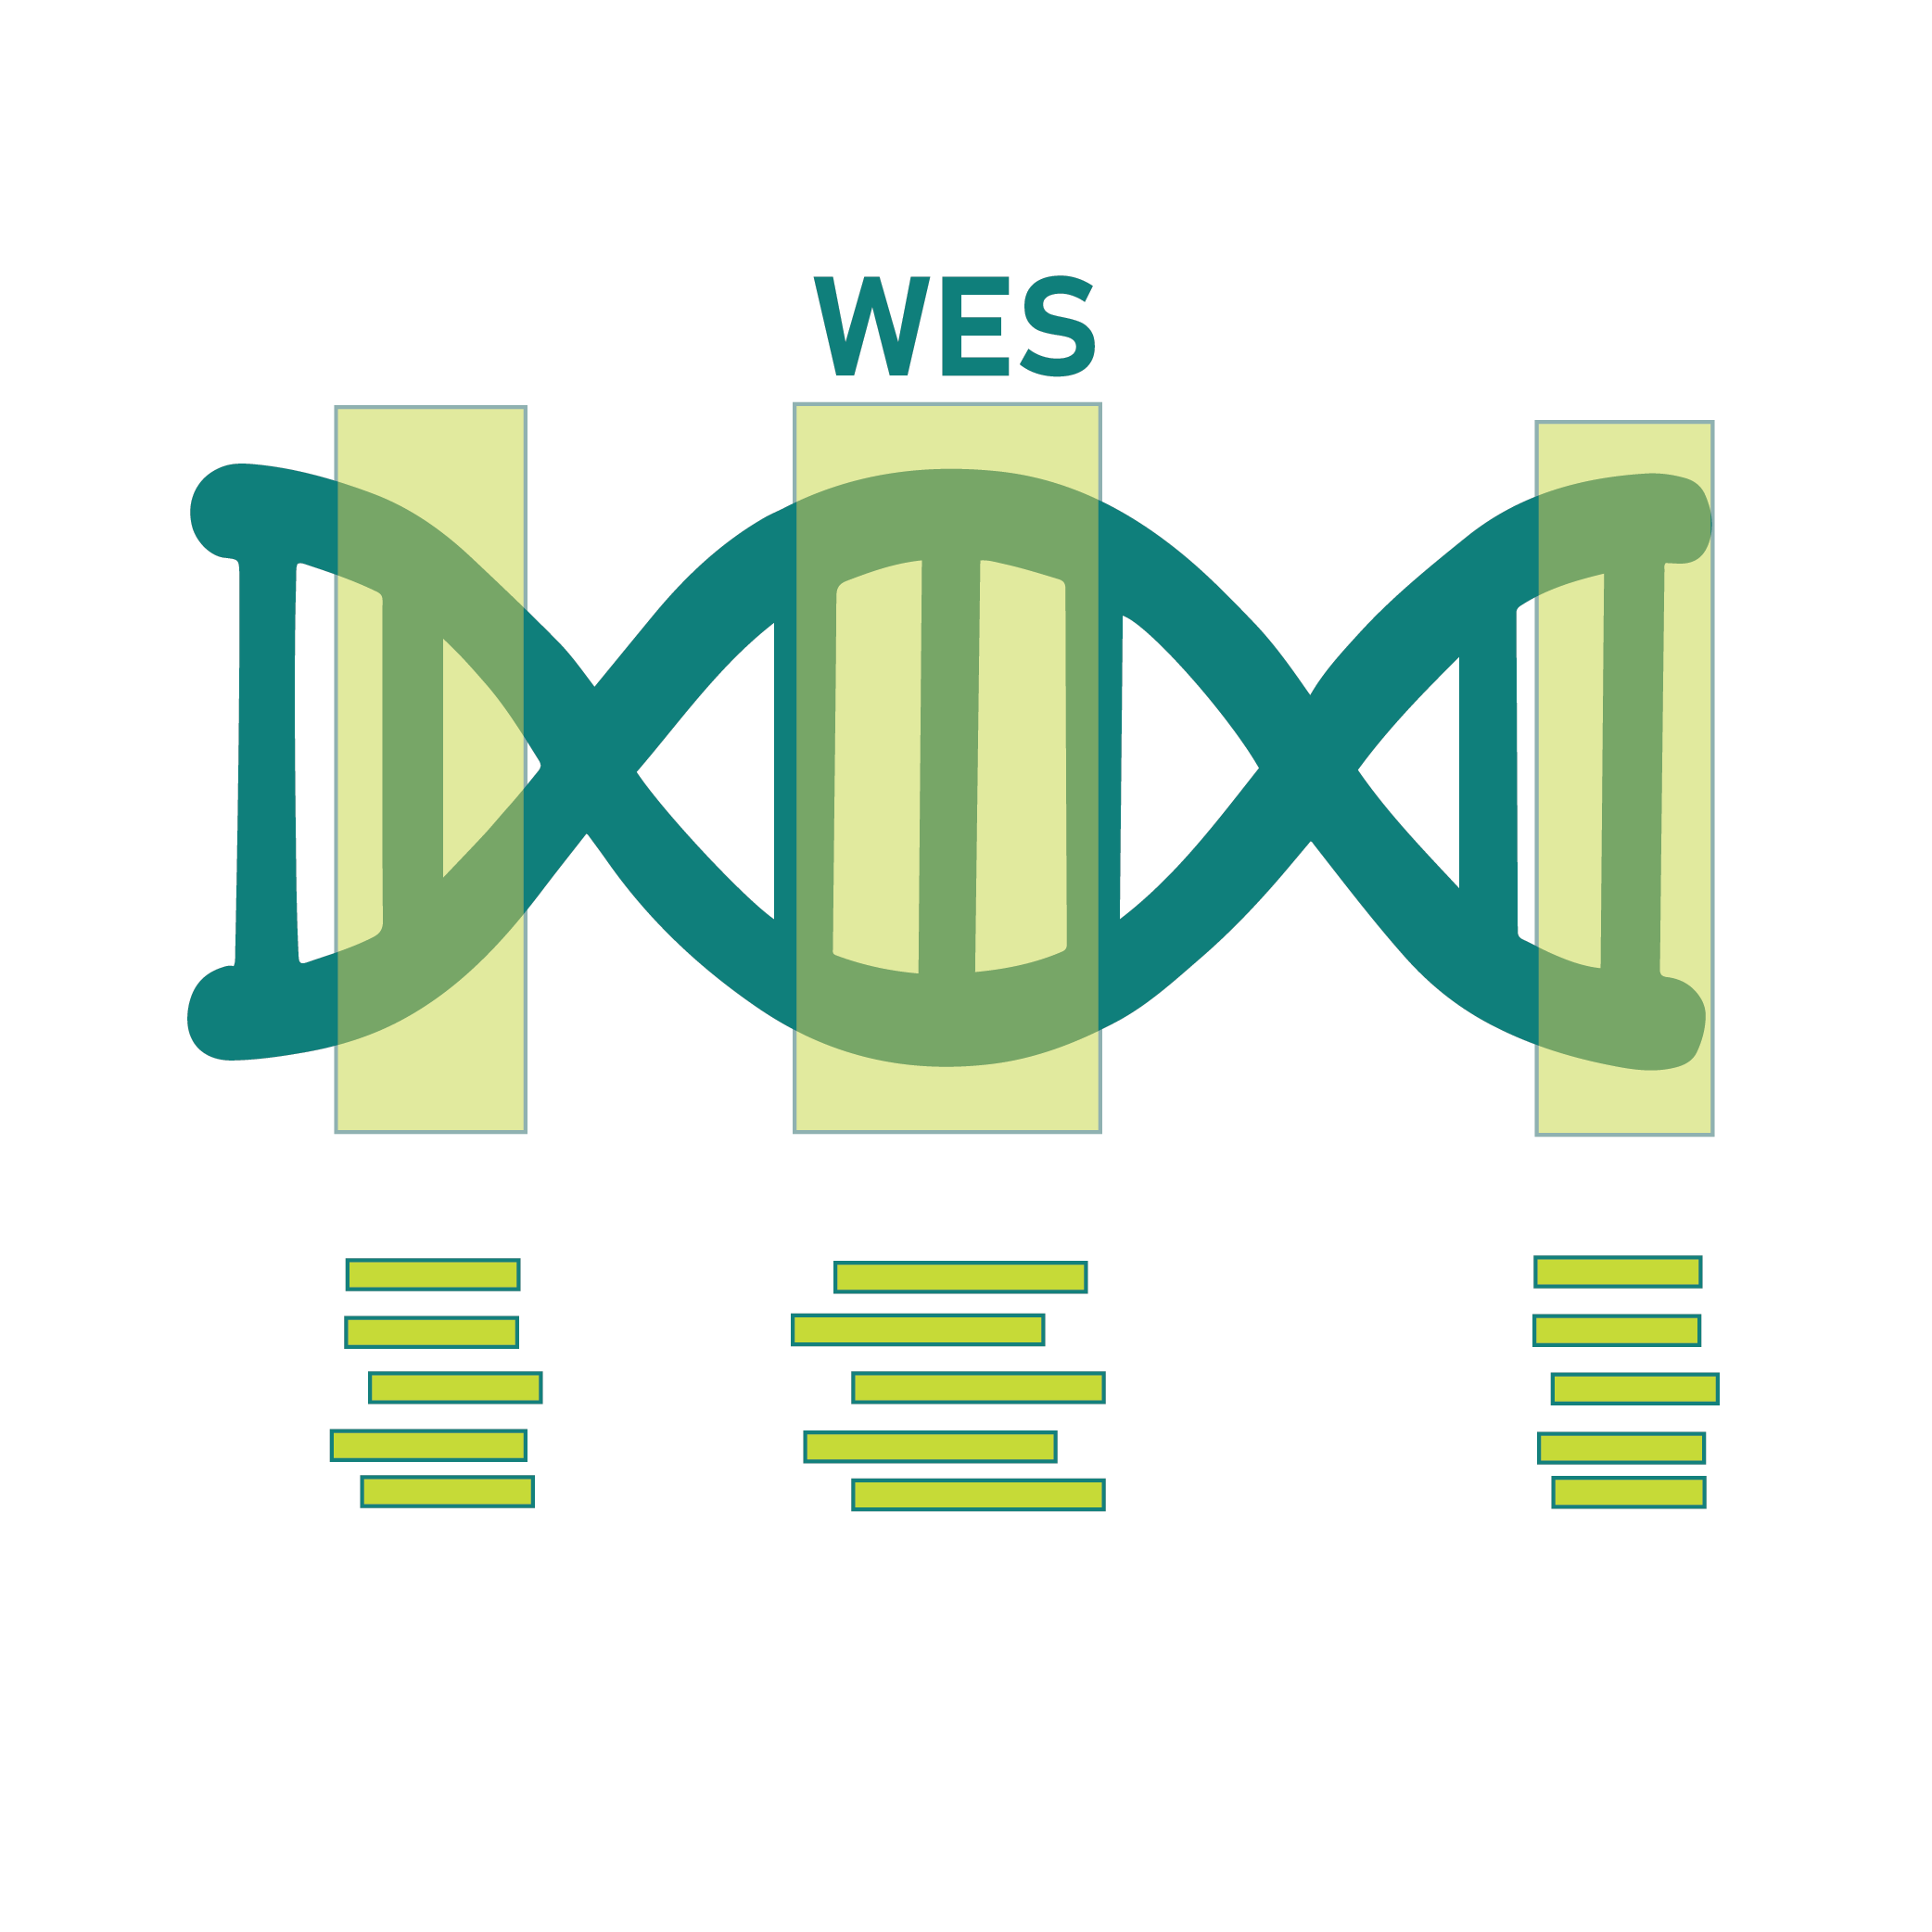 Whole Exome Sequencing (WES)